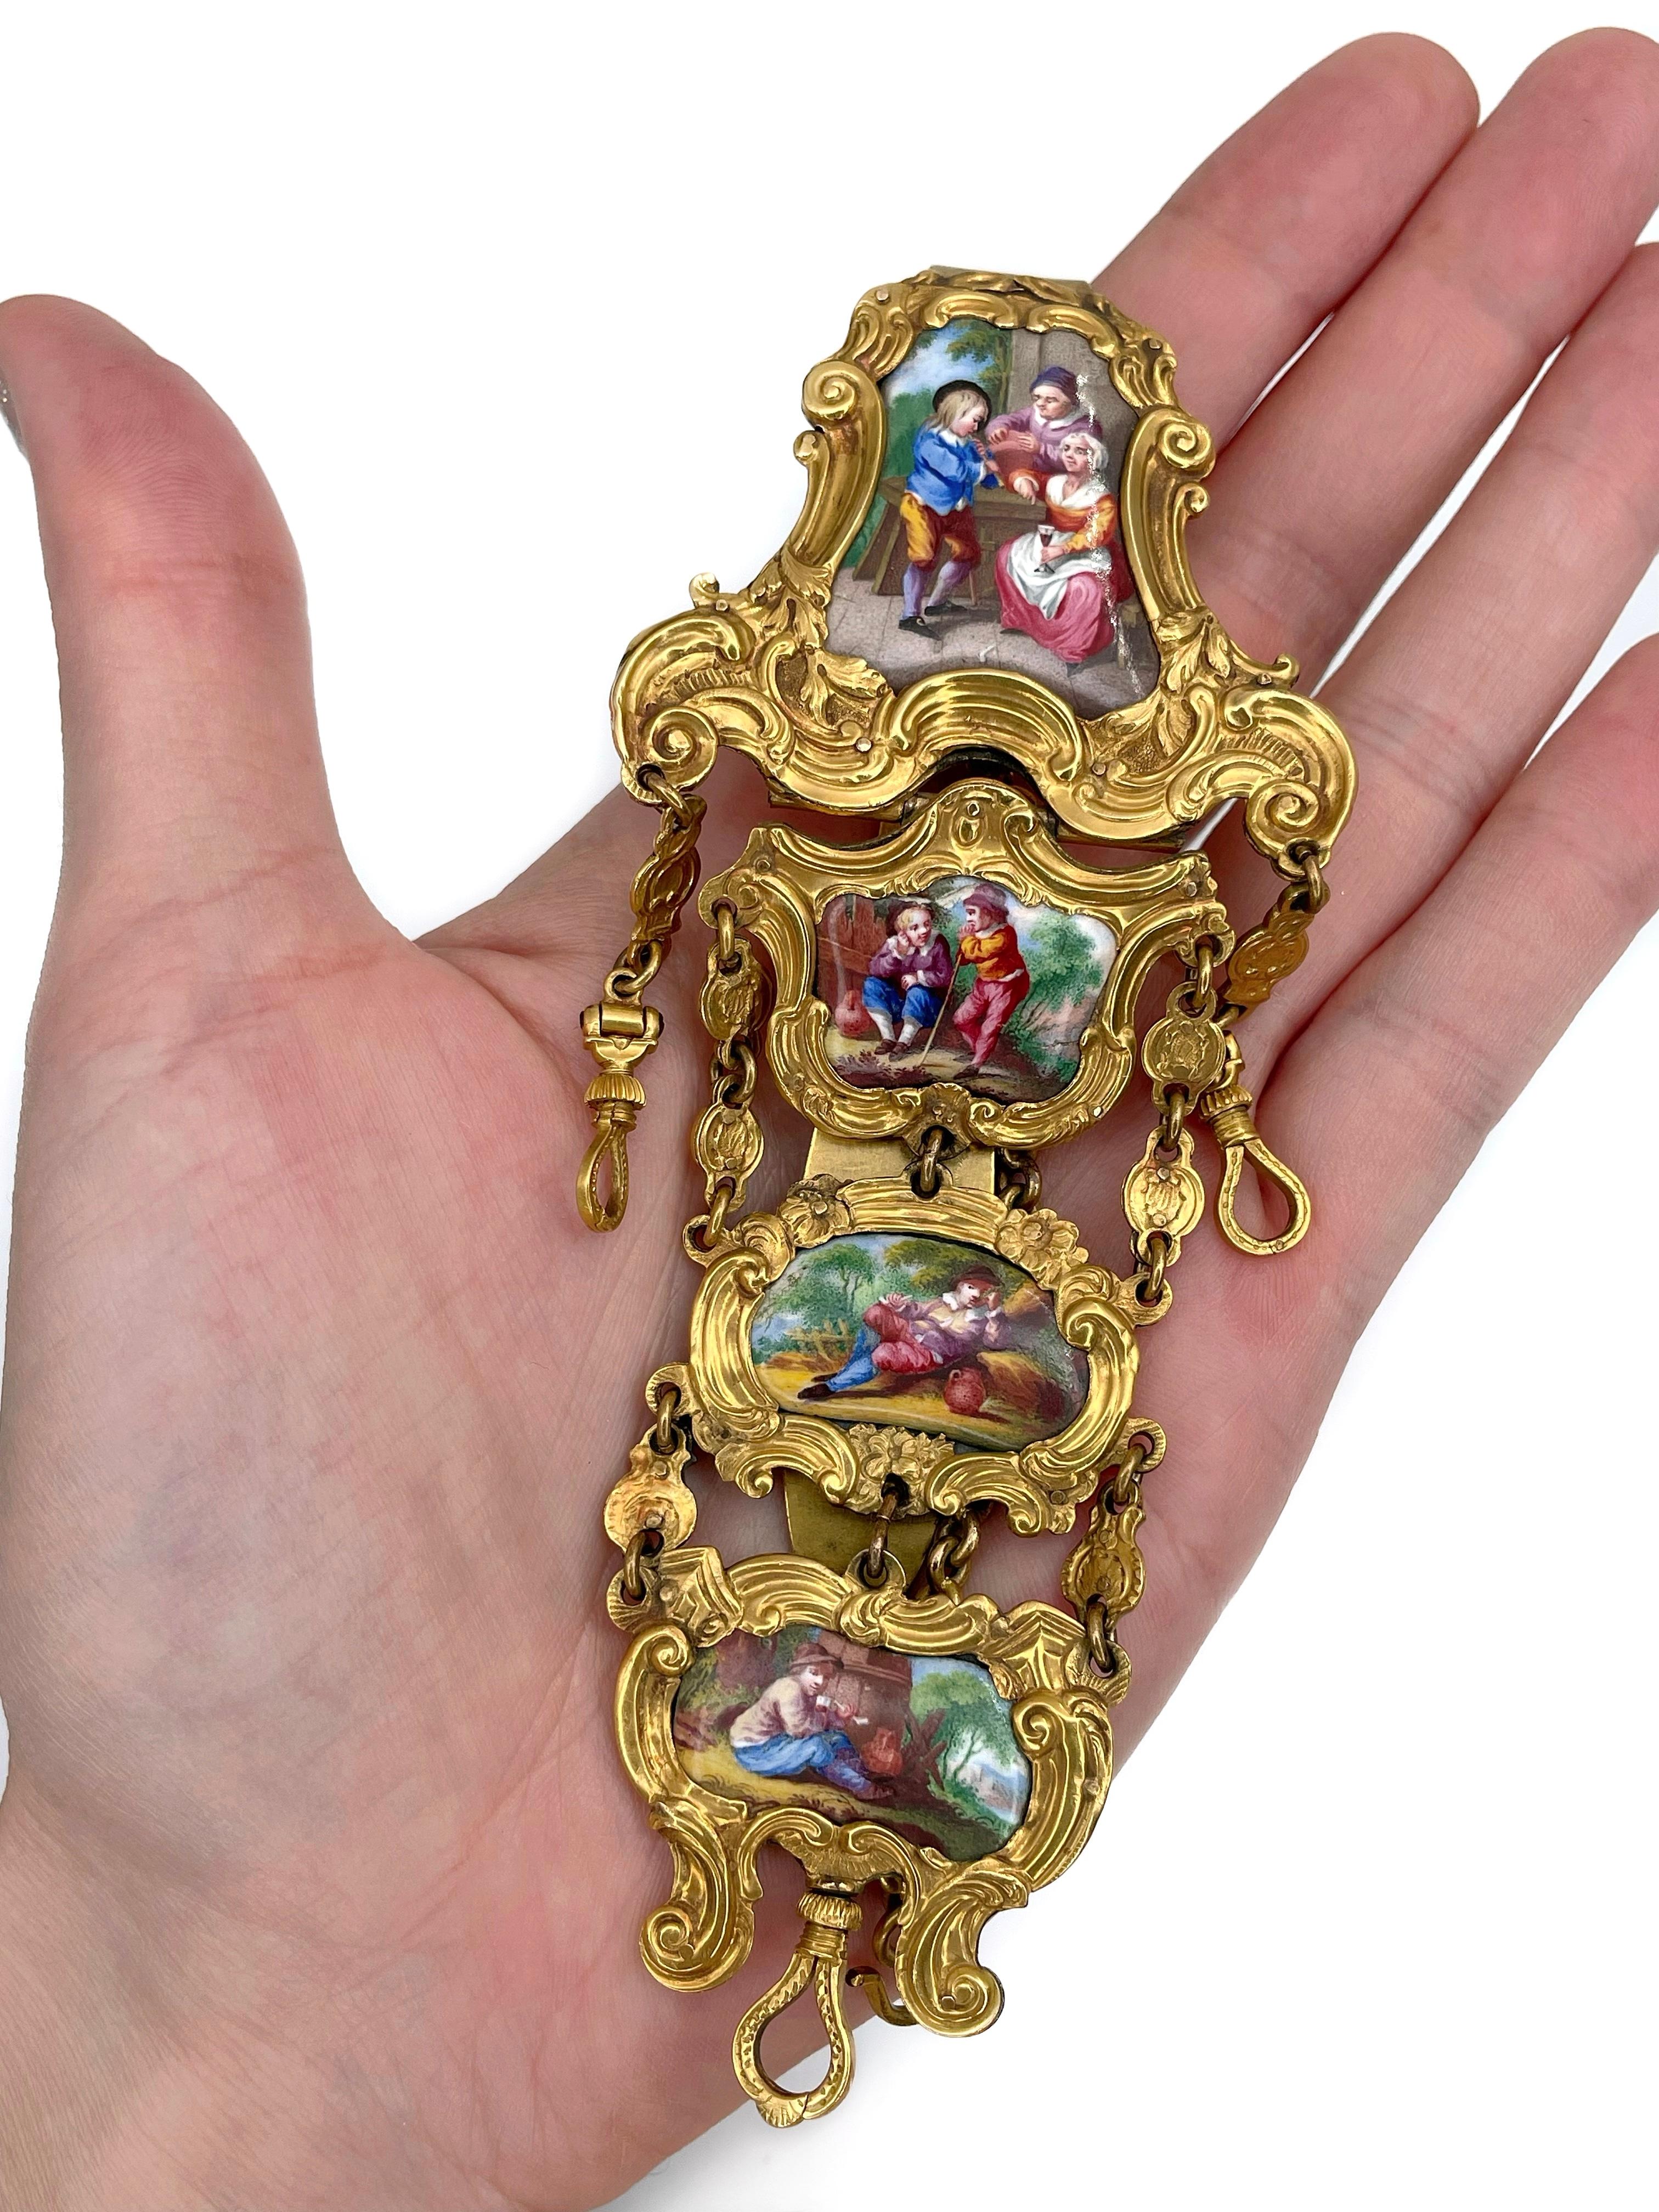 This is an antique chatelaine with a belt hook crafted in base metal and adorned with gold. Circa 1800.

It features several scenes of wine tasting vividly painted on a porcelain. The piece is rich in decorations. It has segments with small